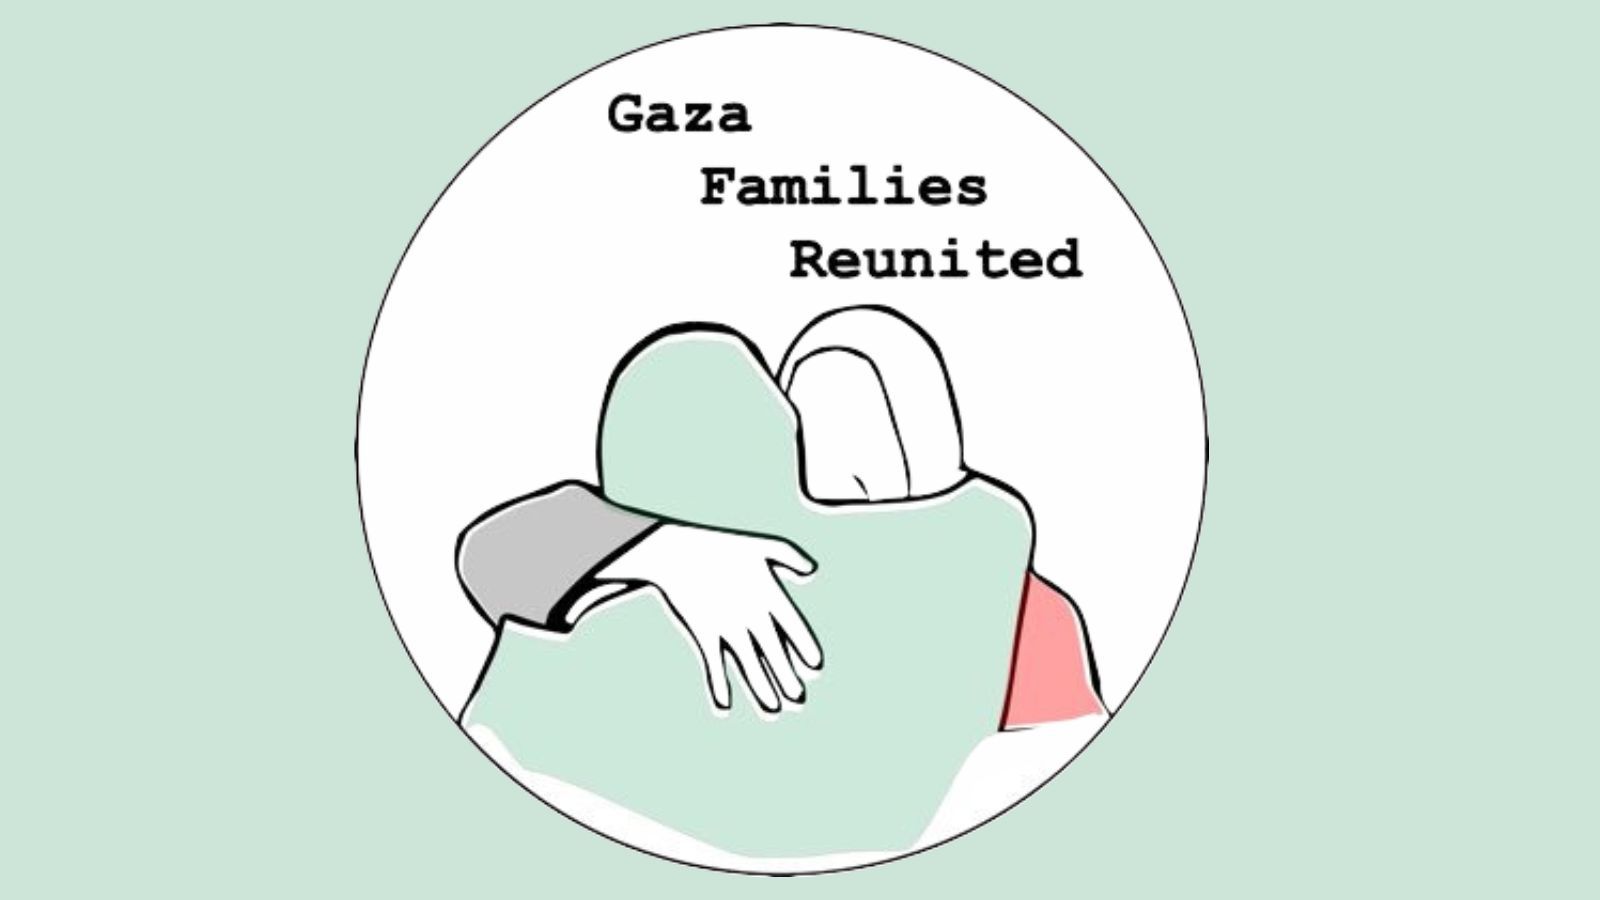 Gaza Families Reunited logo which is a line drawing of two people hugging